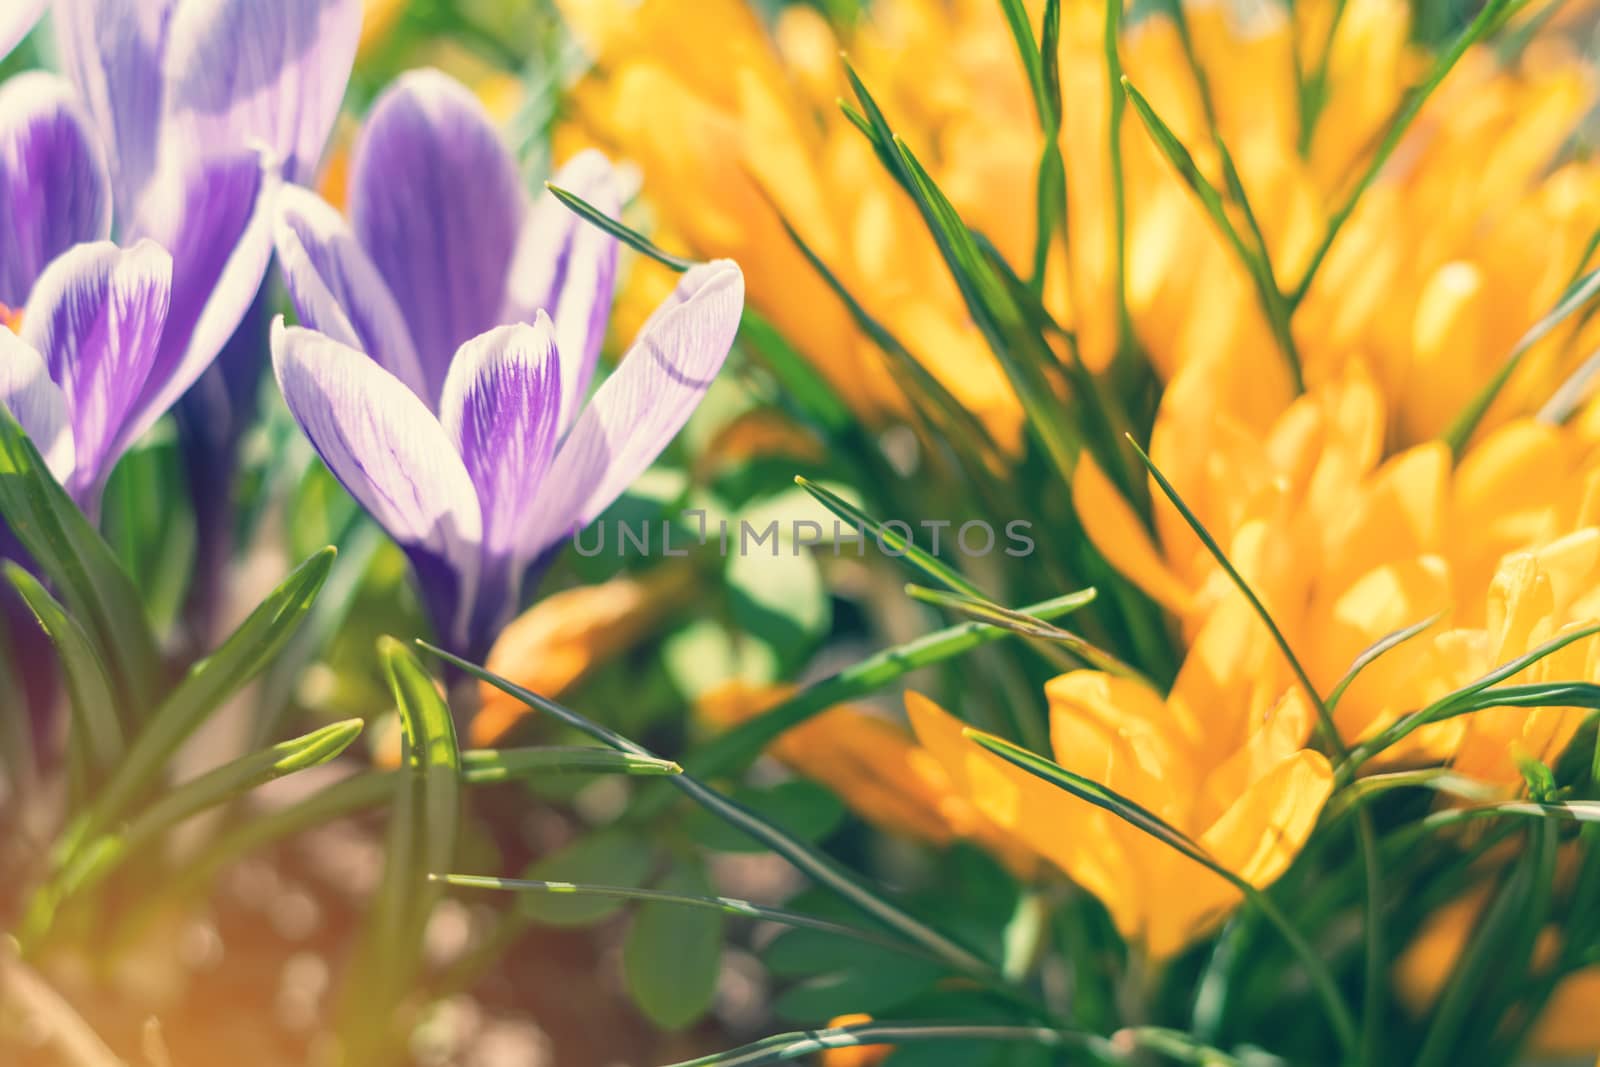 Beautiful spring violet white and yellow flowers crocuses on bokeh background in sunny spring forest under sunbeams. Holidays Easter, valentine, mothers day picture with copy space. Toned.